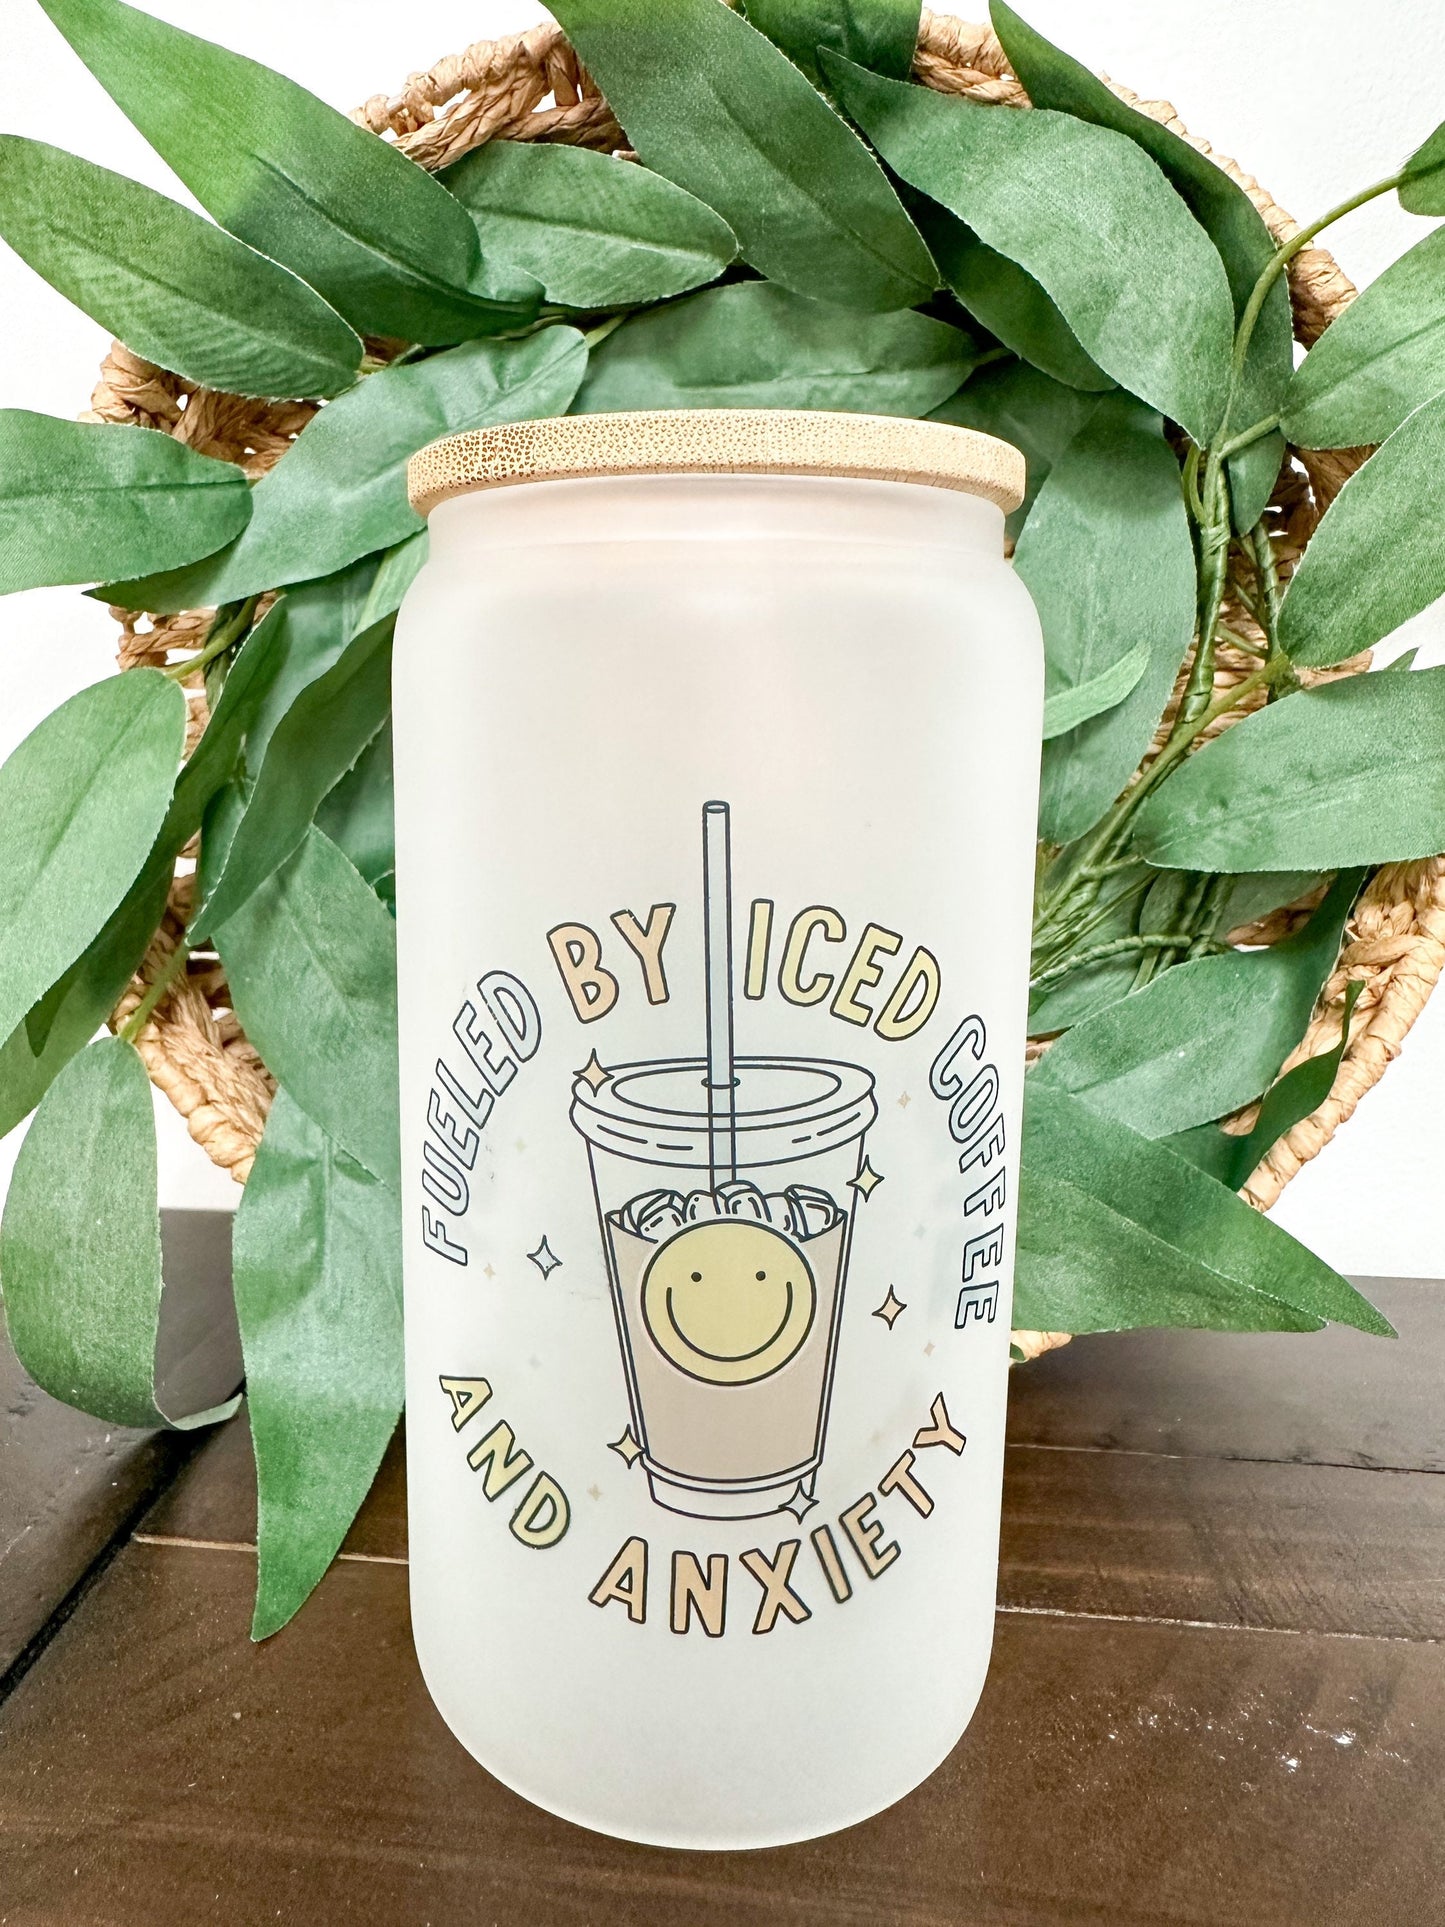 Fueled by Iced Coffee and Anxiety Glass, Iced Coffee Glass, Iced Coffee Cup, Glass Coffee Cup, Gift Ideas for Women, Gifts for Her